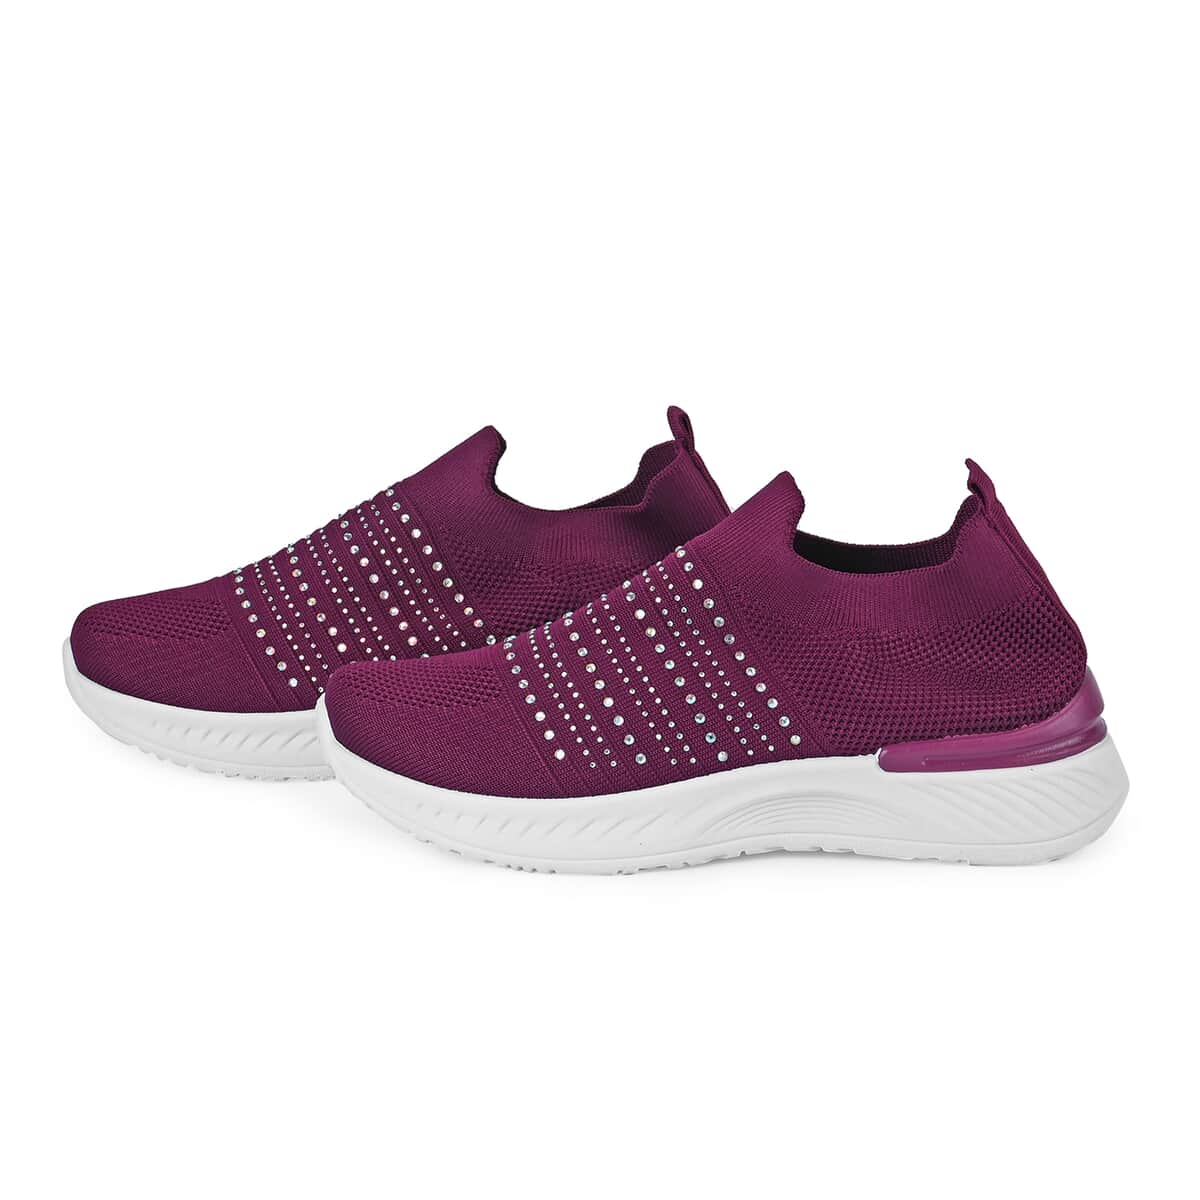 Purple Women's Crystal Jeweled Knit Vented Trainers - (Size 7-7.5) image number 2